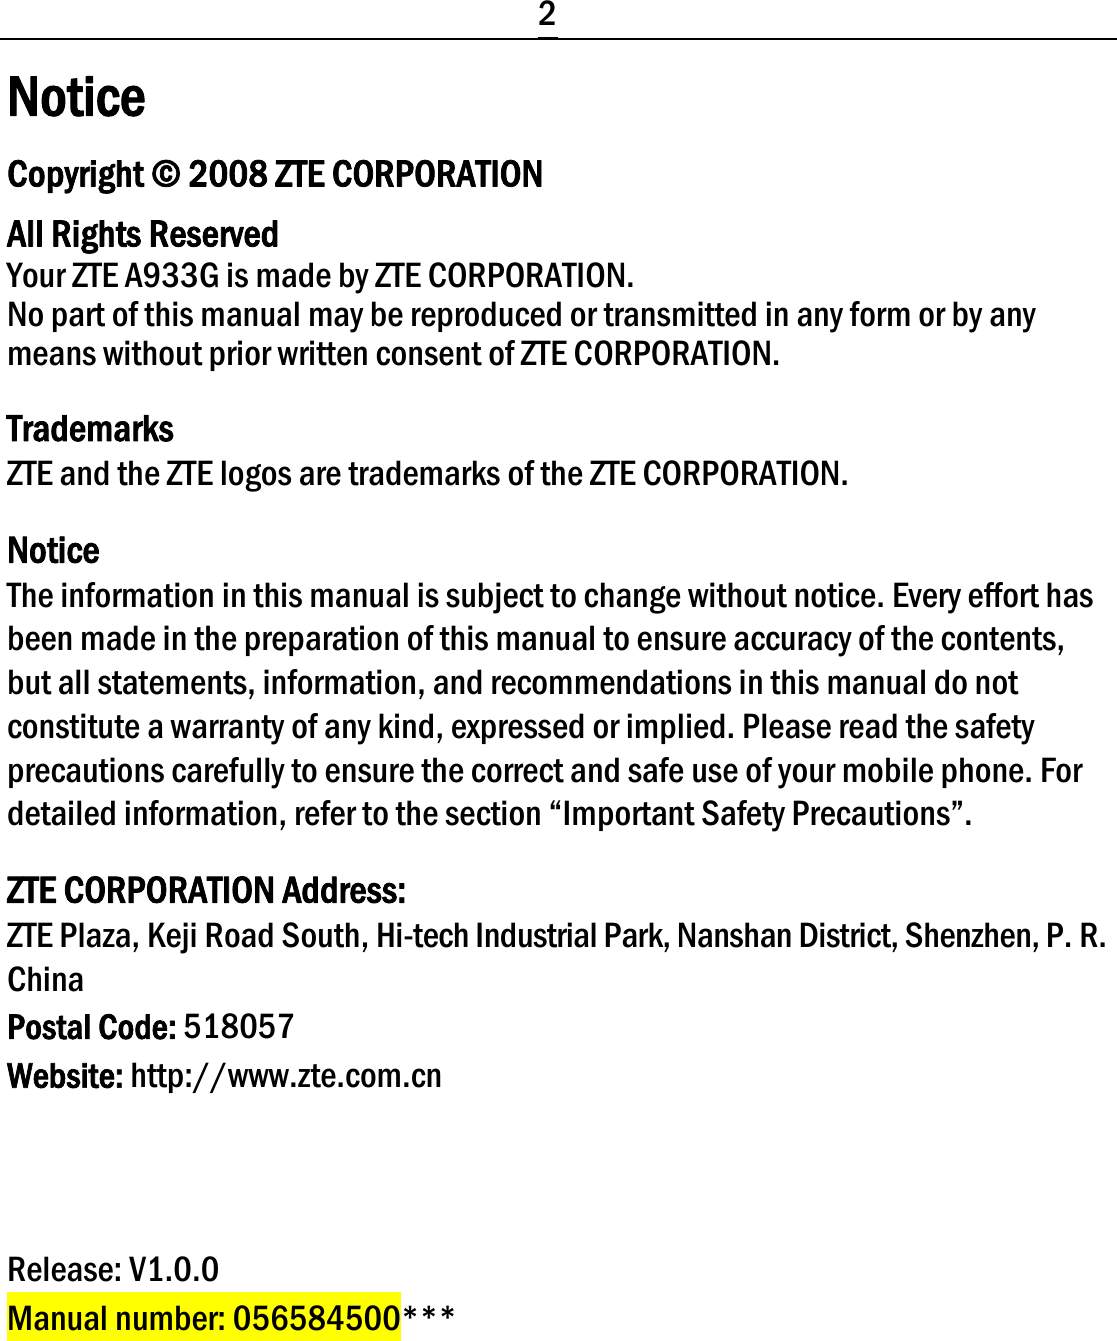  2 Notice Copyright © 2008 ZTE CORPORATION All Rights Reserved Your ZTE A933G is made by ZTE CORPORATION. No part of this manual may be reproduced or transmitted in any form or by any means without prior written consent of ZTE CORPORATION. Trademarks ZTE and the ZTE logos are trademarks of the ZTE CORPORATION. Notice The information in this manual is subject to change without notice. Every effort has been made in the preparation of this manual to ensure accuracy of the contents, but all statements, information, and recommendations in this manual do not constitute a warranty of any kind, expressed or implied. Please read the safety precautions carefully to ensure the correct and safe use of your mobile phone. For detailed information, refer to the section “Important Safety Precautions”. ZTE CORPORATION Address: ZTE Plaza, Keji Road South, Hi-tech Industrial Park, Nanshan District, Shenzhen, P. R. China Postal Code: 518057 Website: http://www.zte.com.cn    Release: V1.0.0 Manual number: 056584500*** 